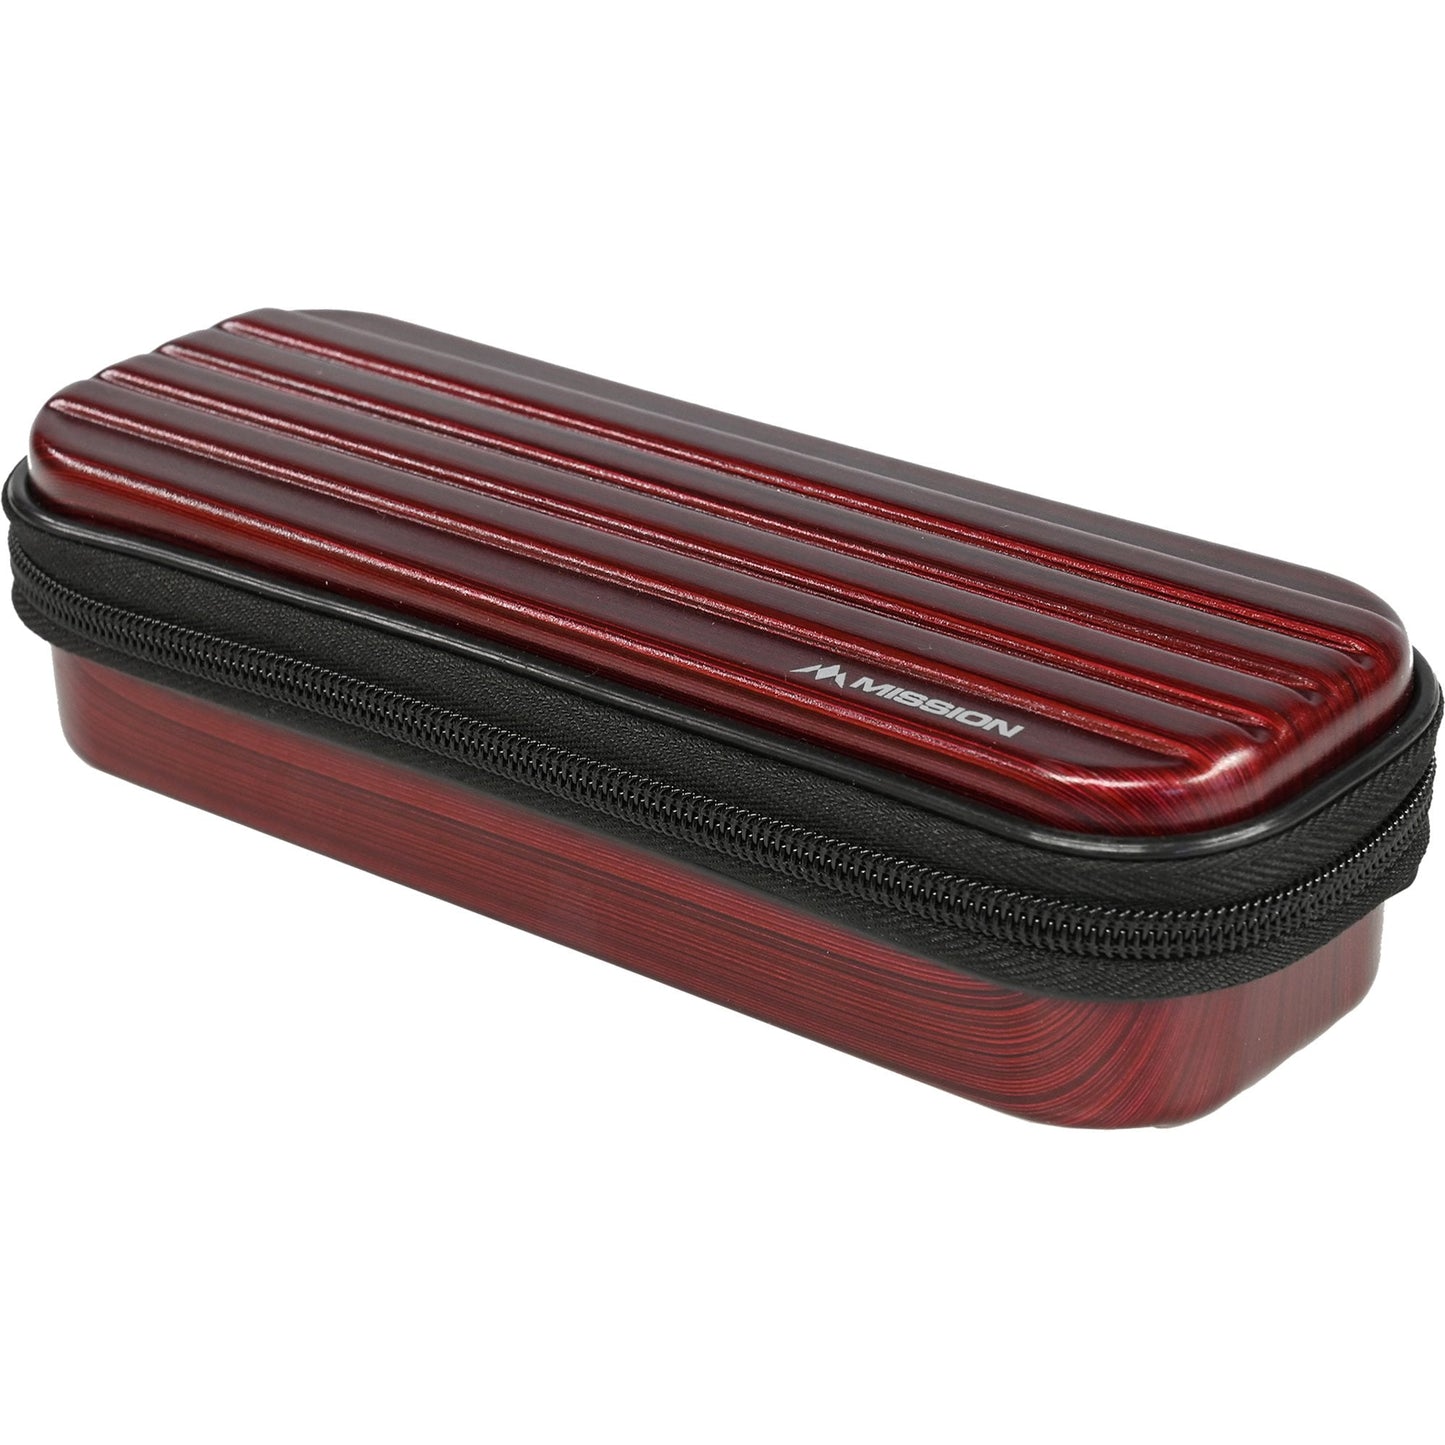 Mission ABS-1 Darts Case - Strong Protection - Metallic Deep Red